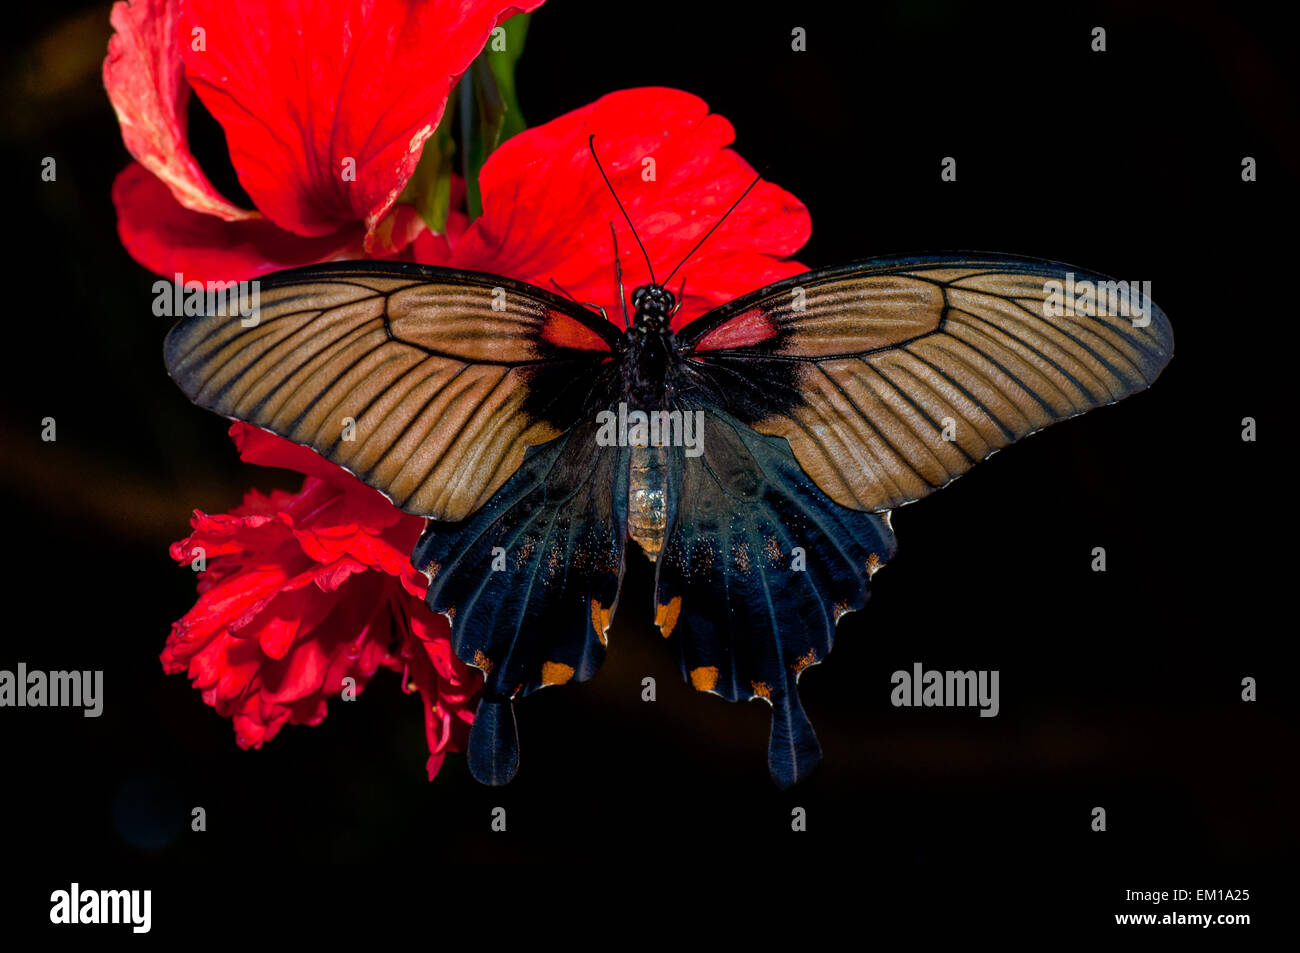 Black and brown butterfly on red flower and the dark background Stock Photo